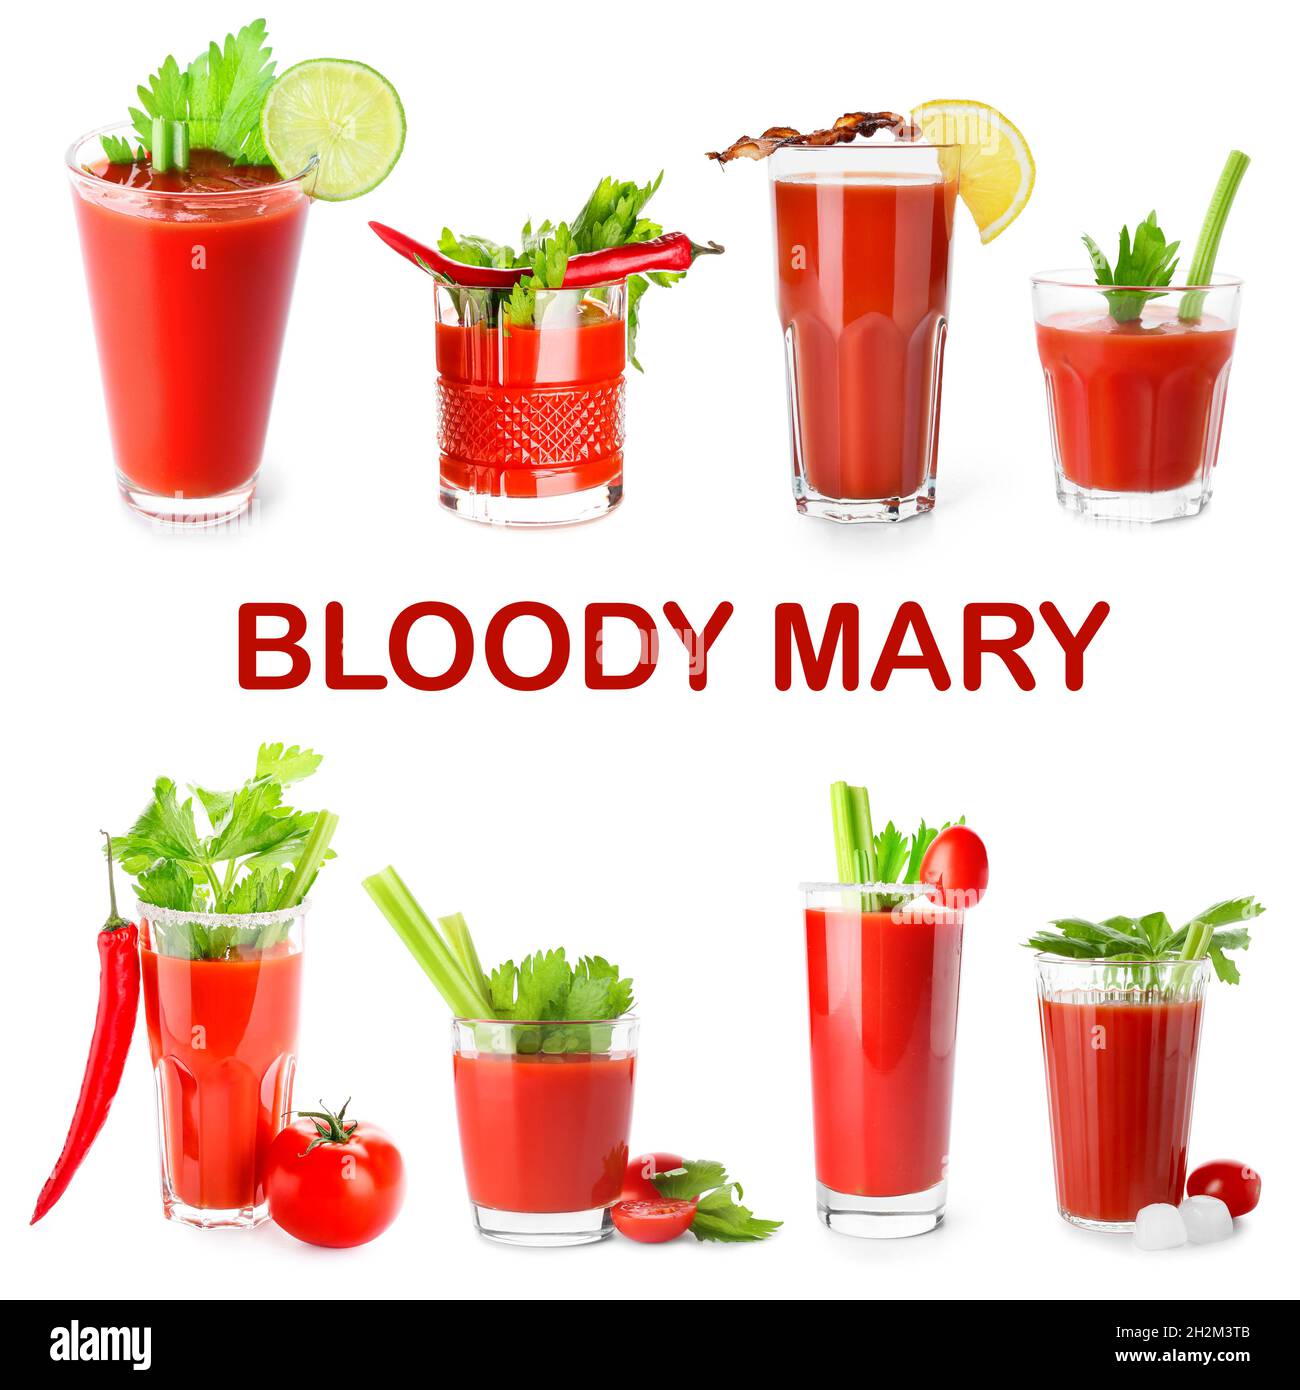 https://c8.alamy.com/comp/2H2M3TB/glasses-of-bloody-mary-cocktail-on-white-background-2H2M3TB.jpg